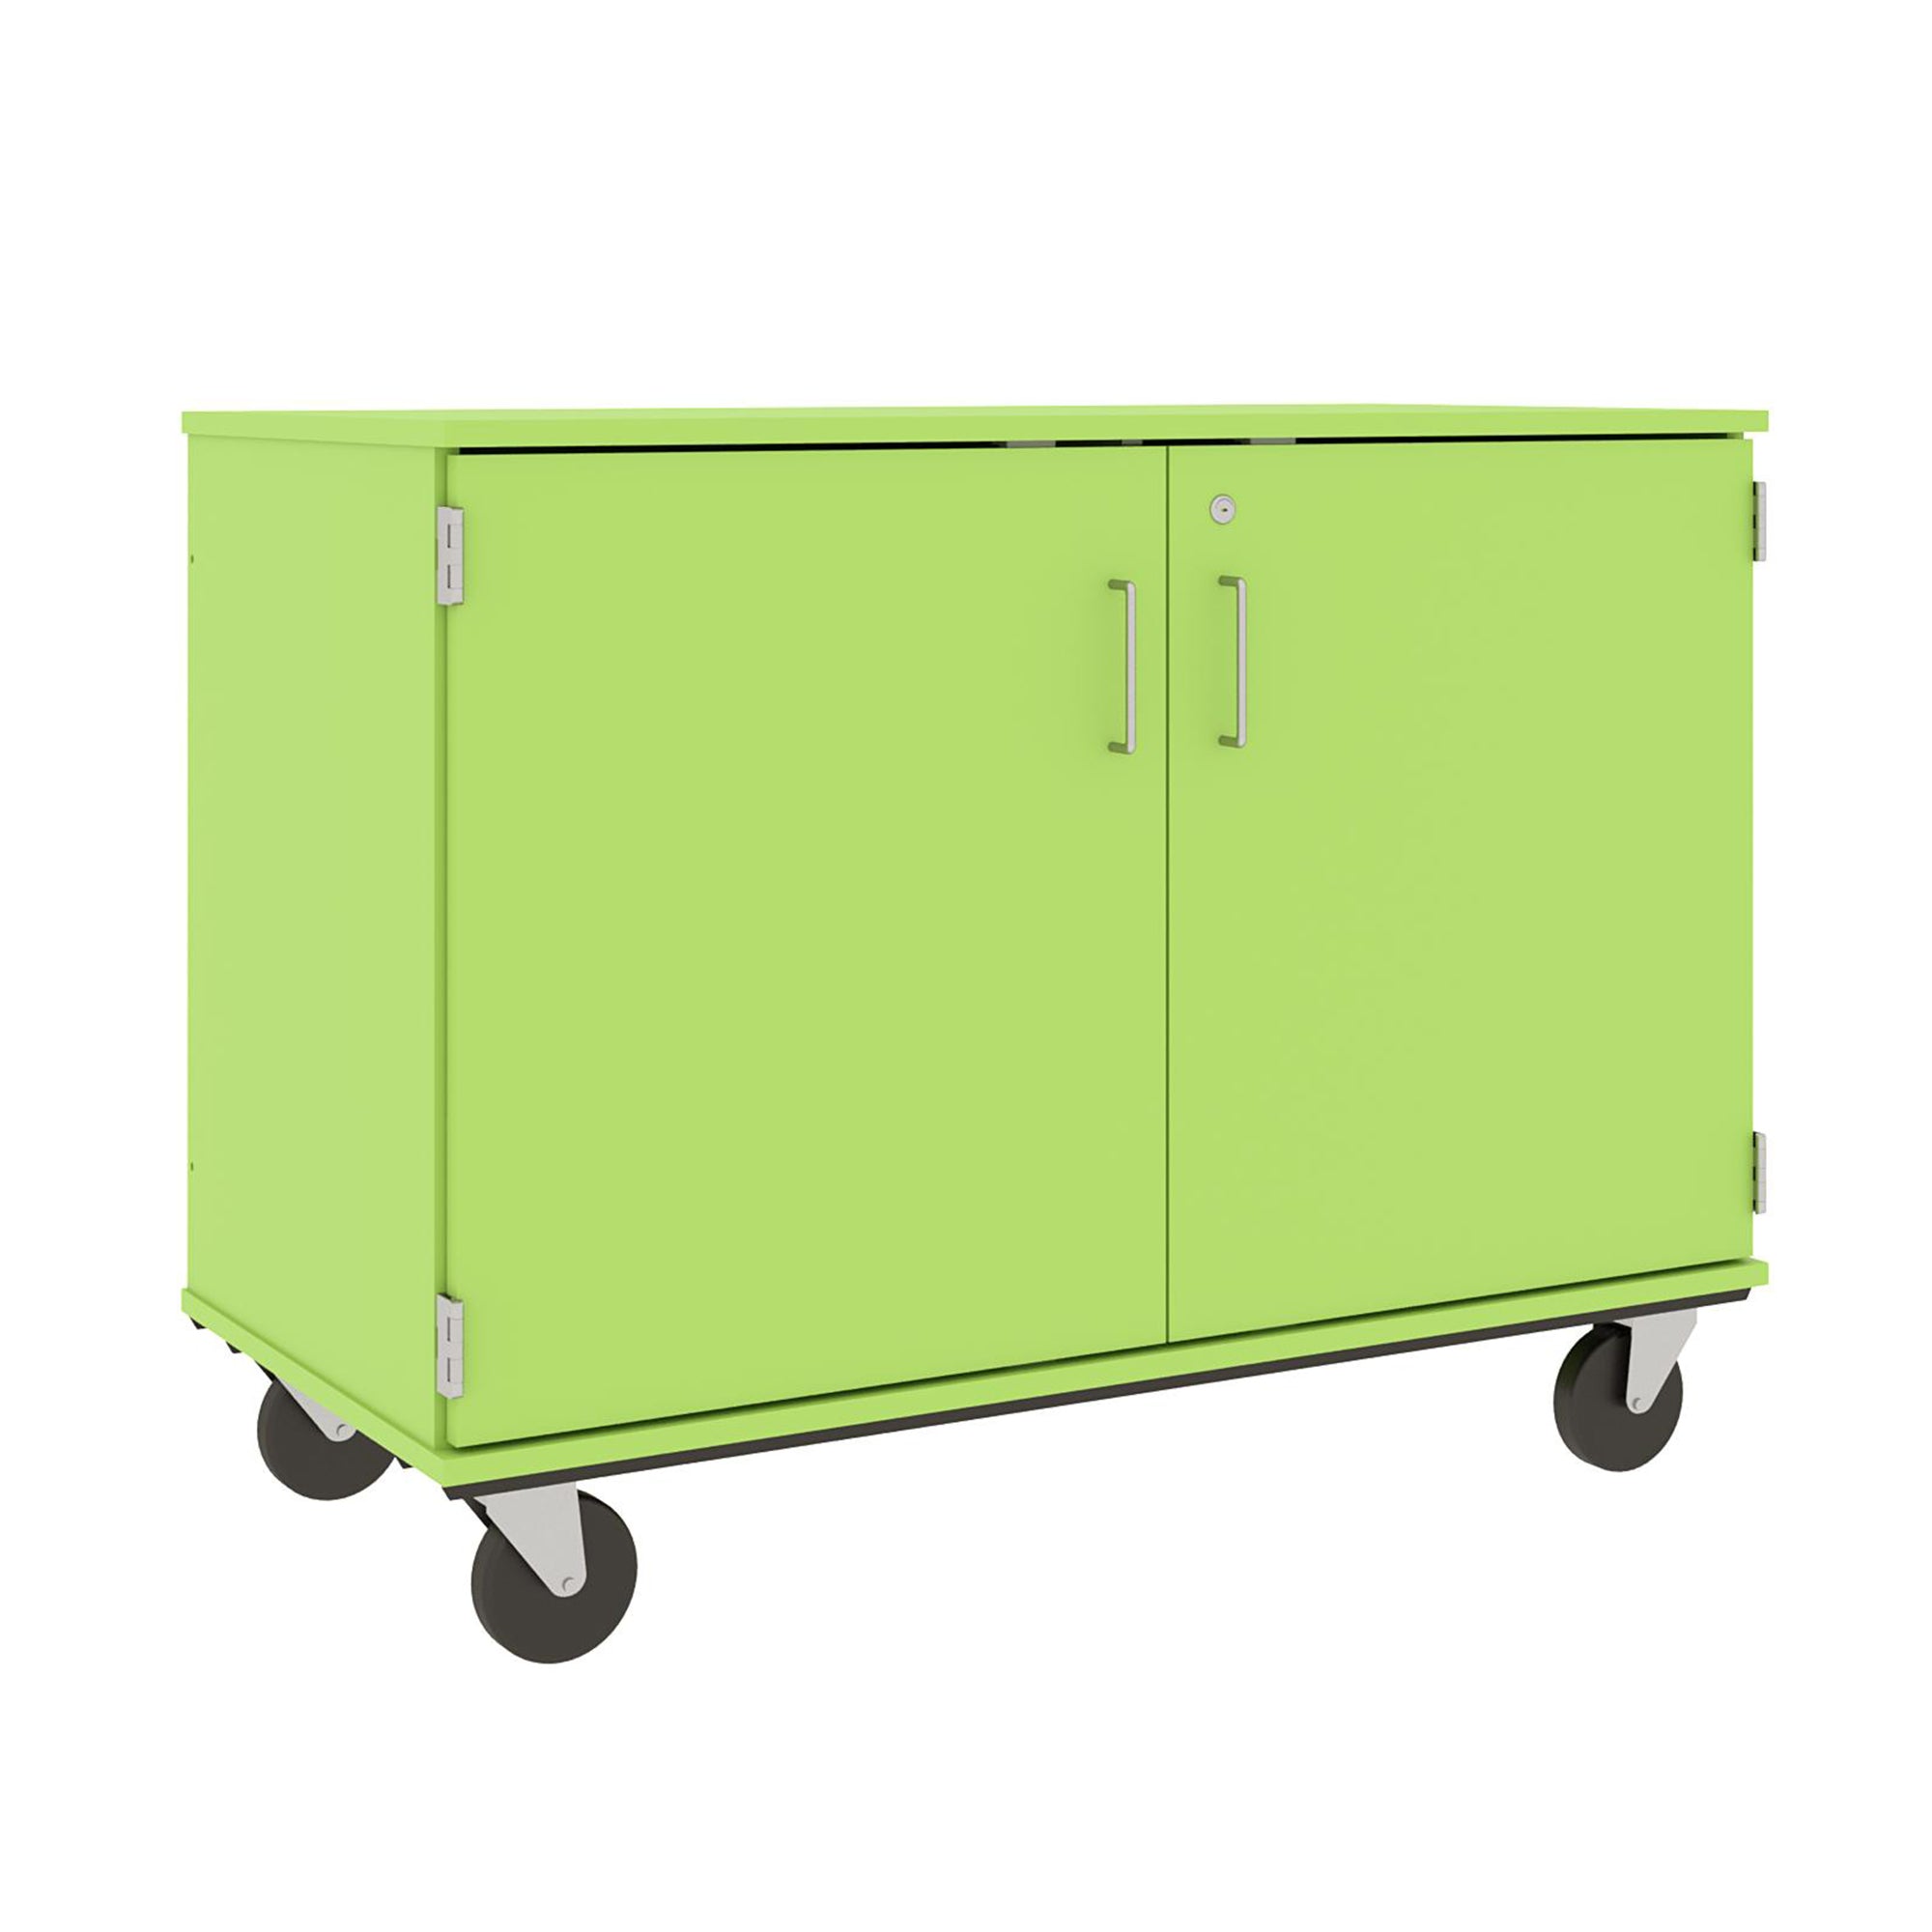 36" Assembled Slotted Storage Cart with Locking Door - 80117 F36